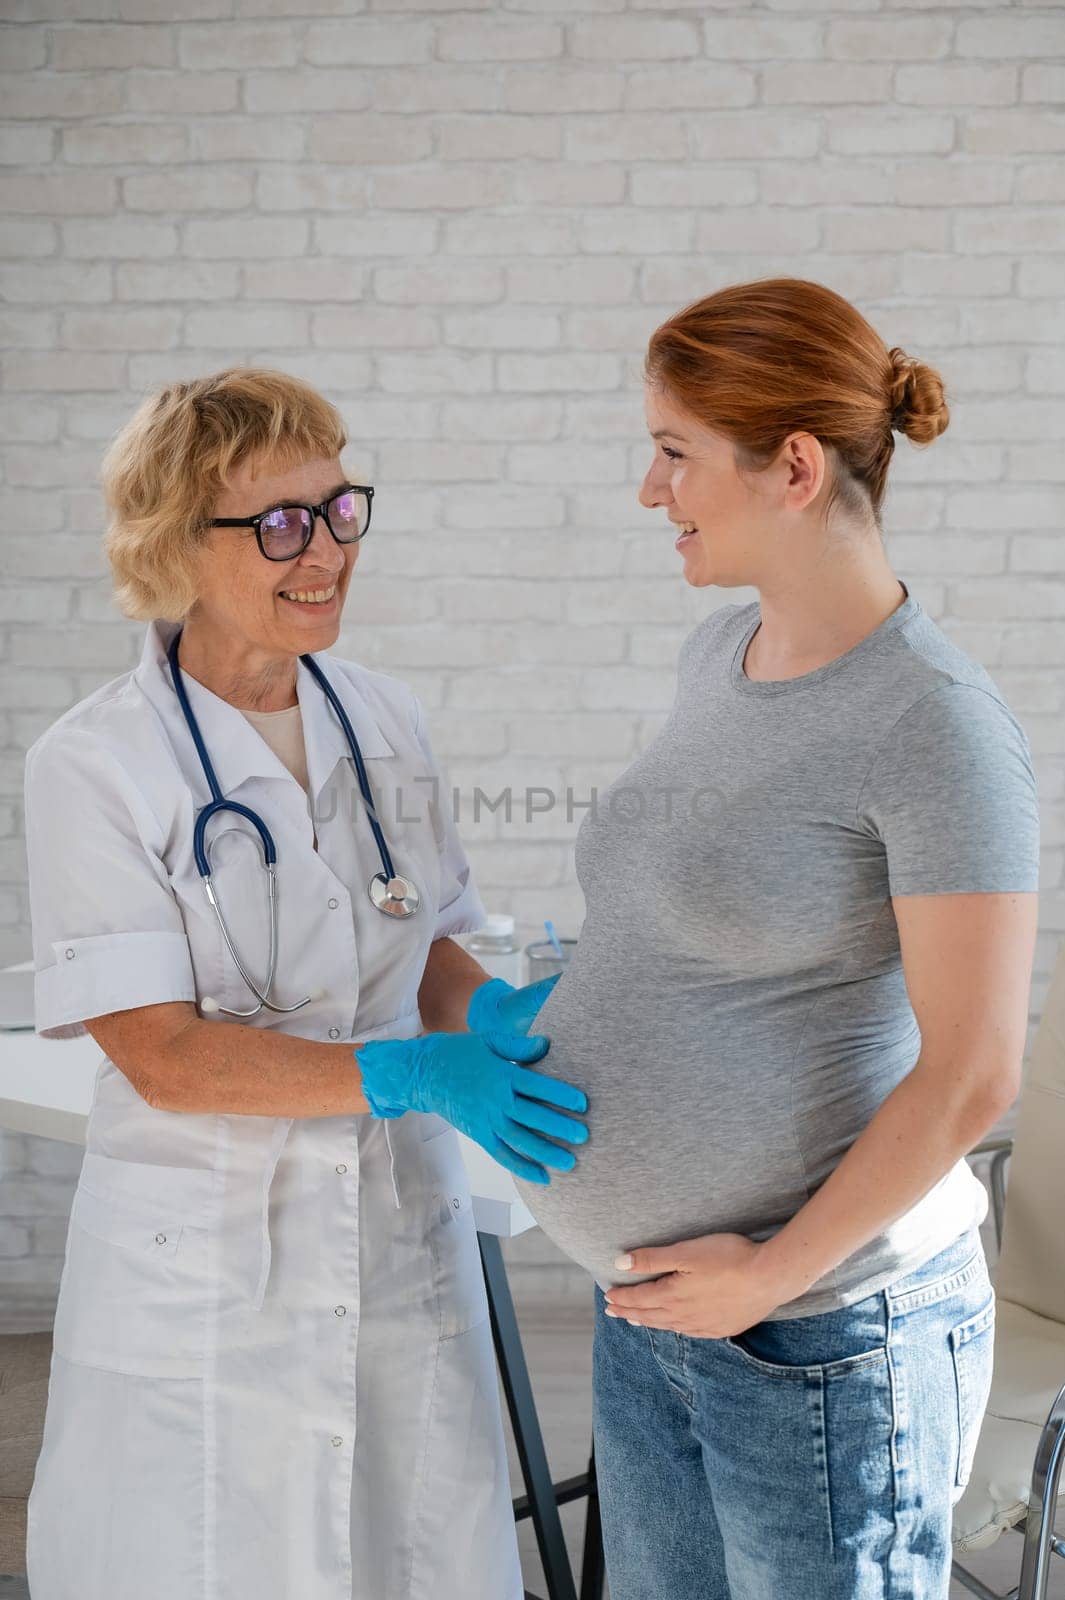 Pregnant woman visiting a doctor. Elderly Caucasian female gynecologist holds hands on the tummy of a pregnant patient. Vertical photo. by mrwed54